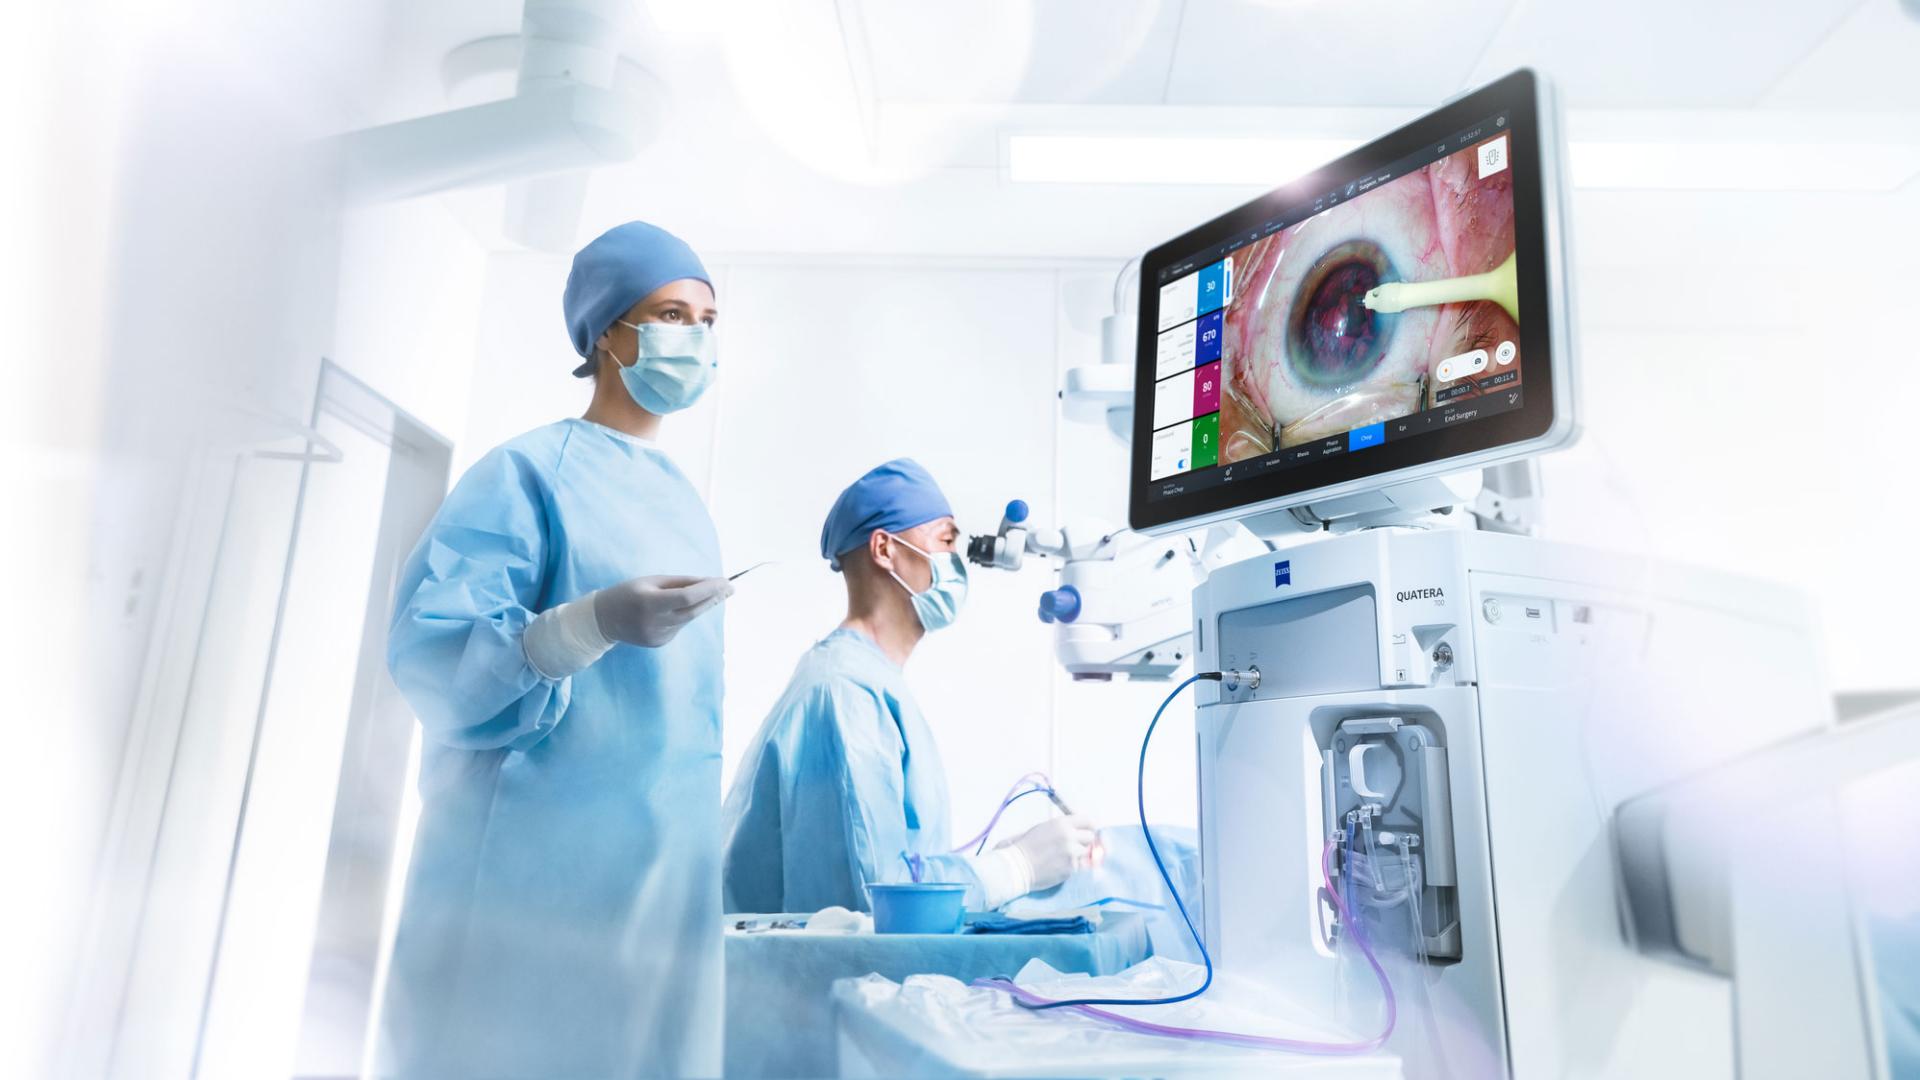 ZEISS Medical Technology Business Group